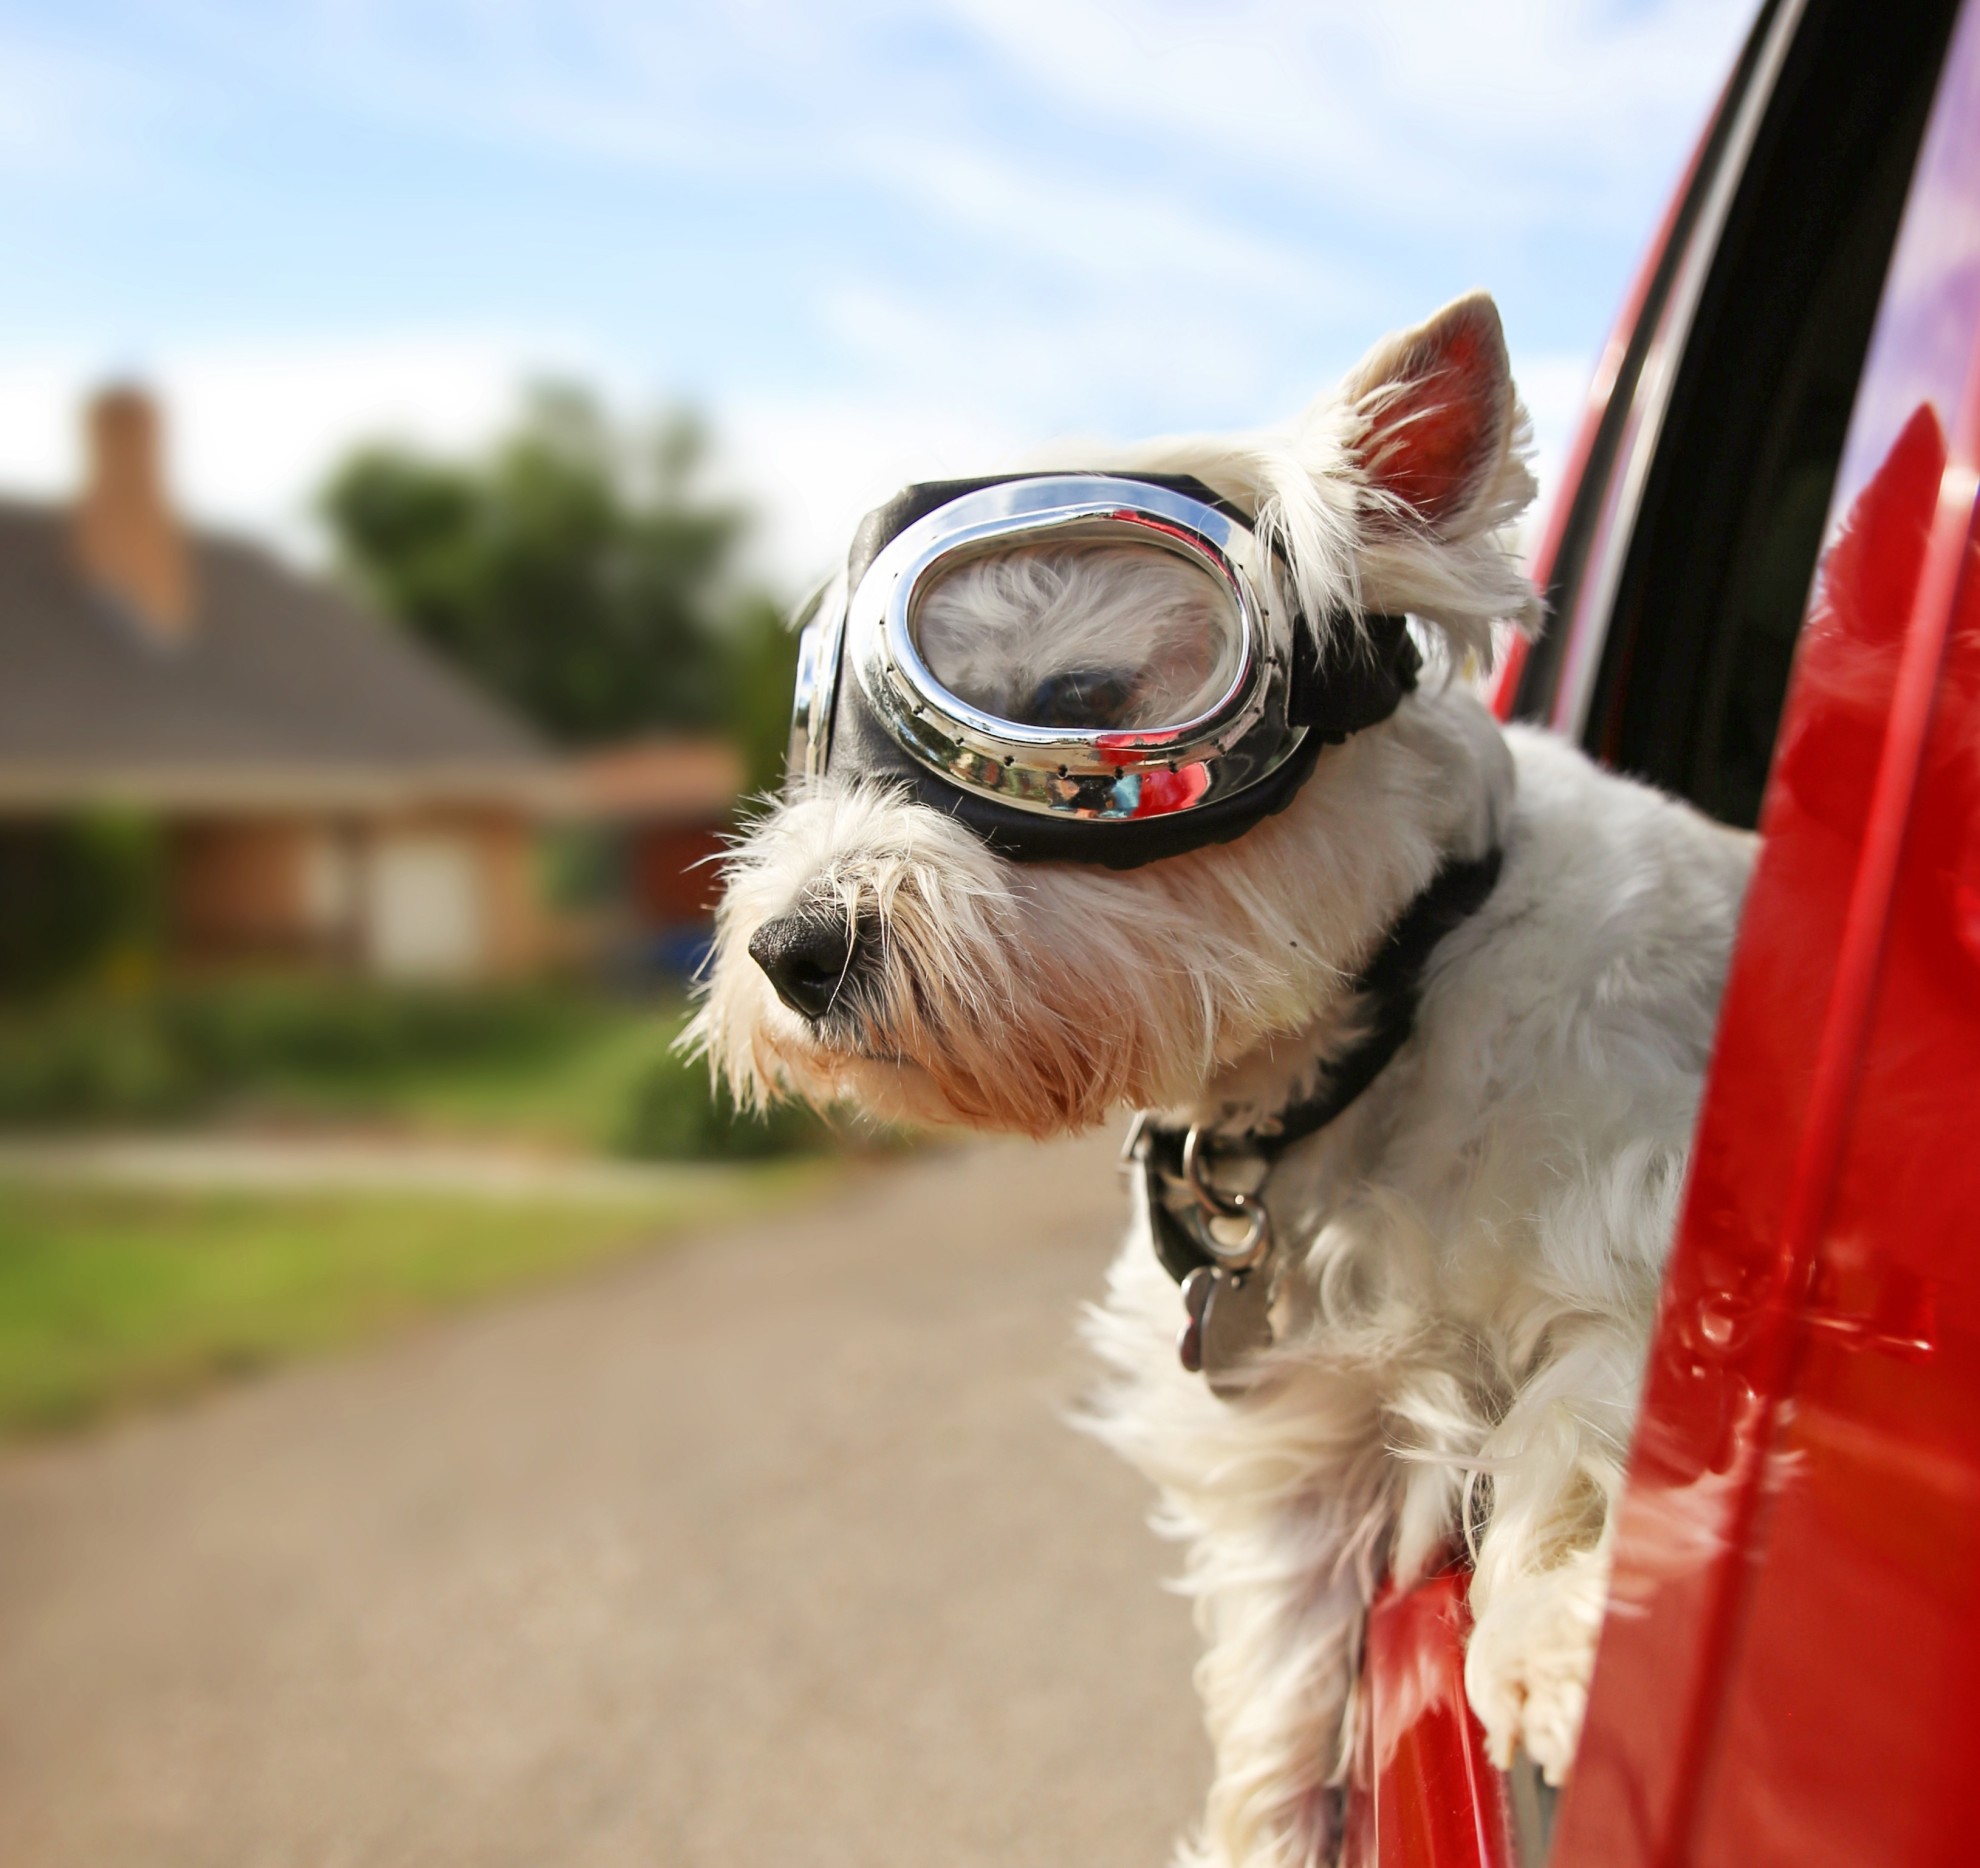 Dog with goggles leaning out of car window